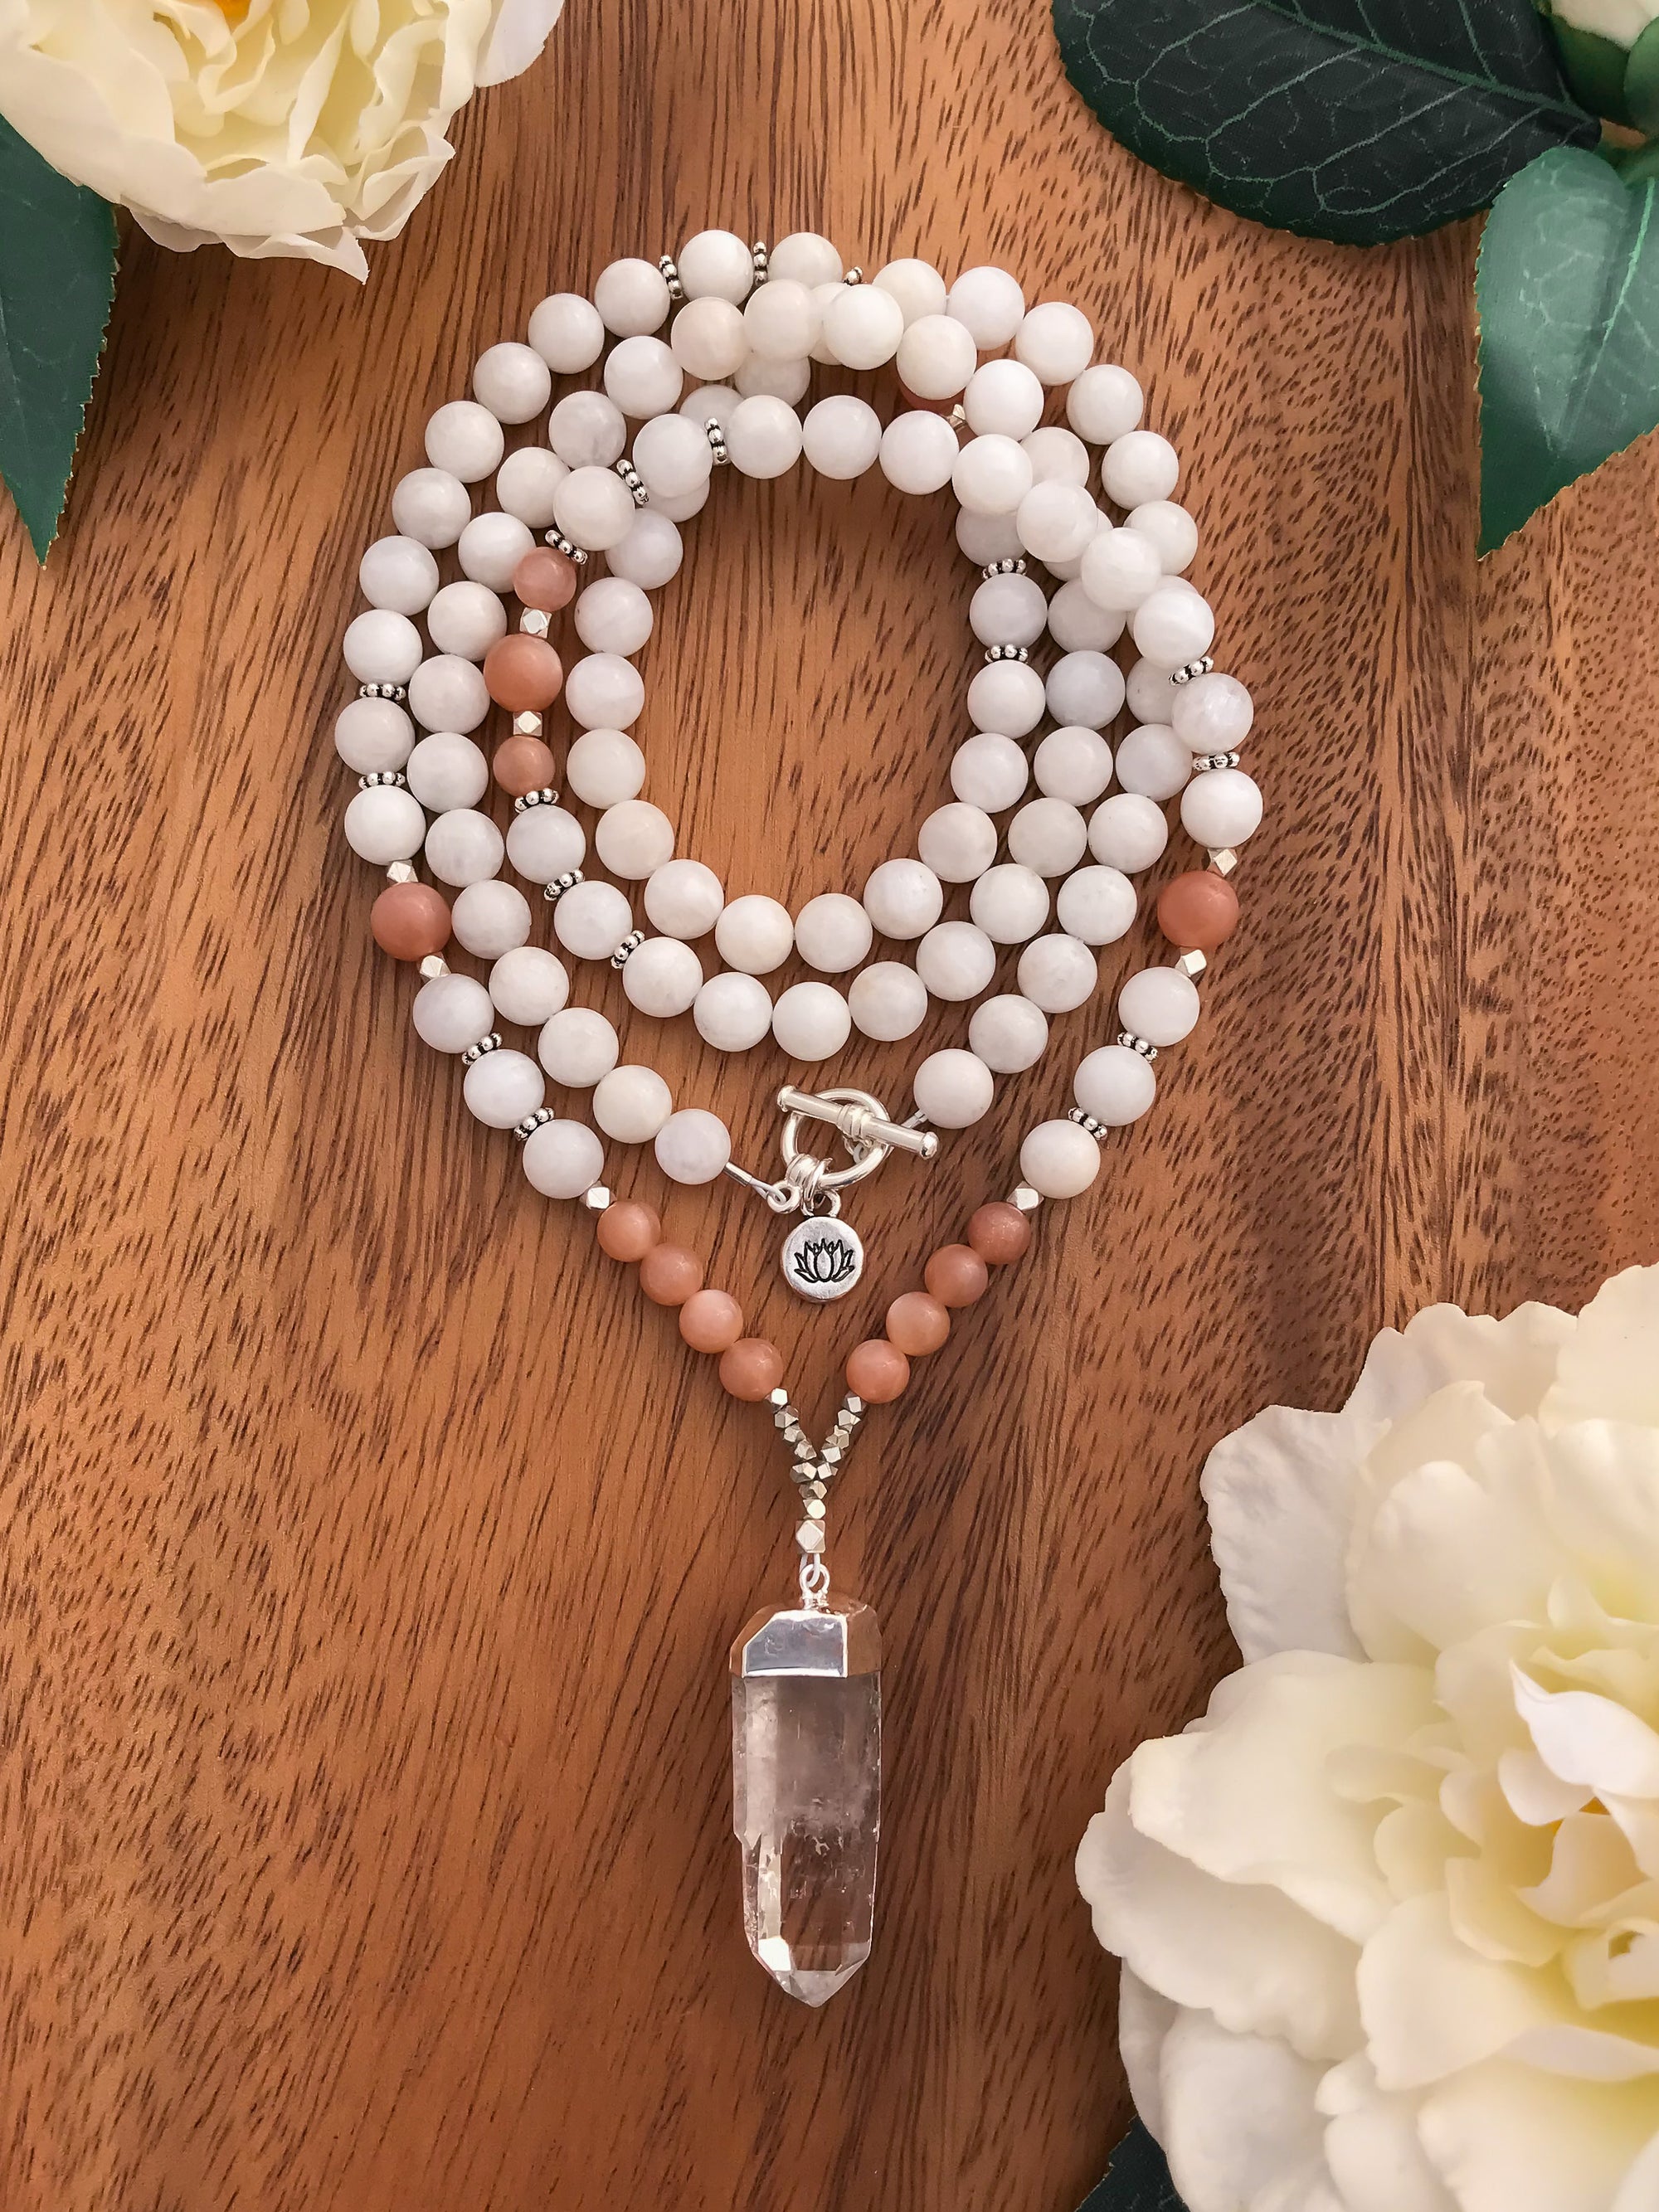 How to care for your Buddhist Mala